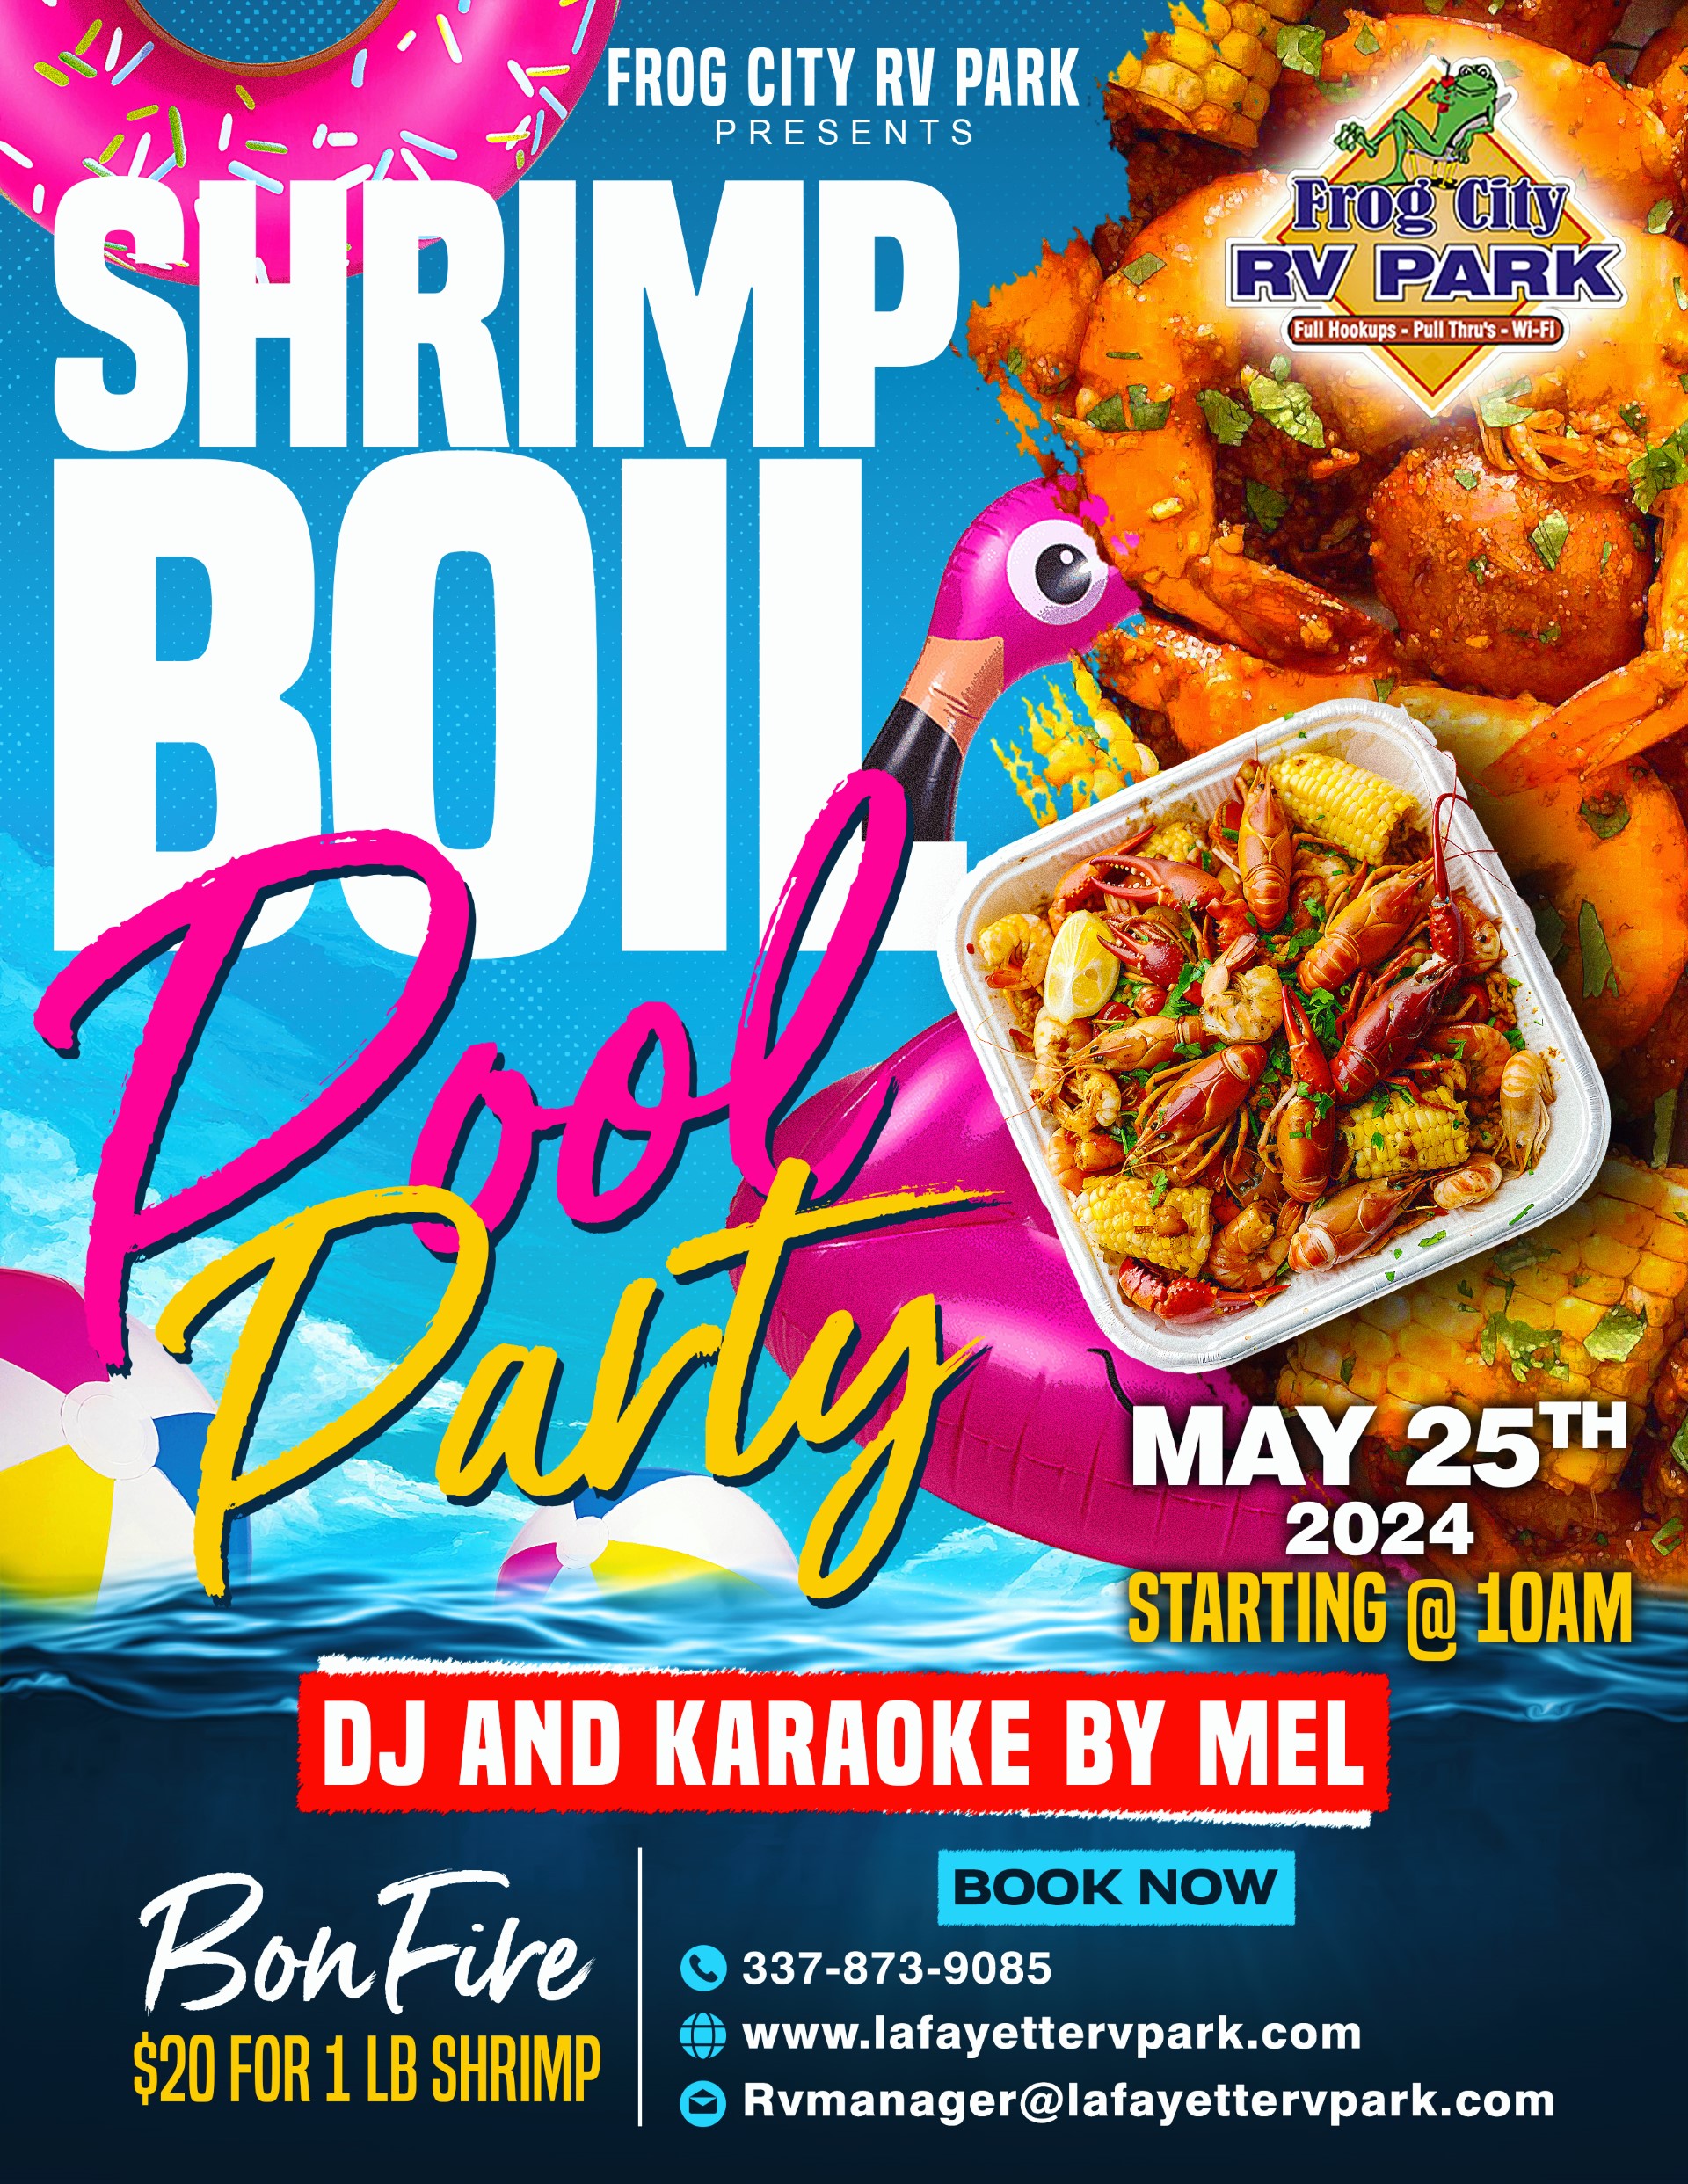 5-25-24 POOL PARTY